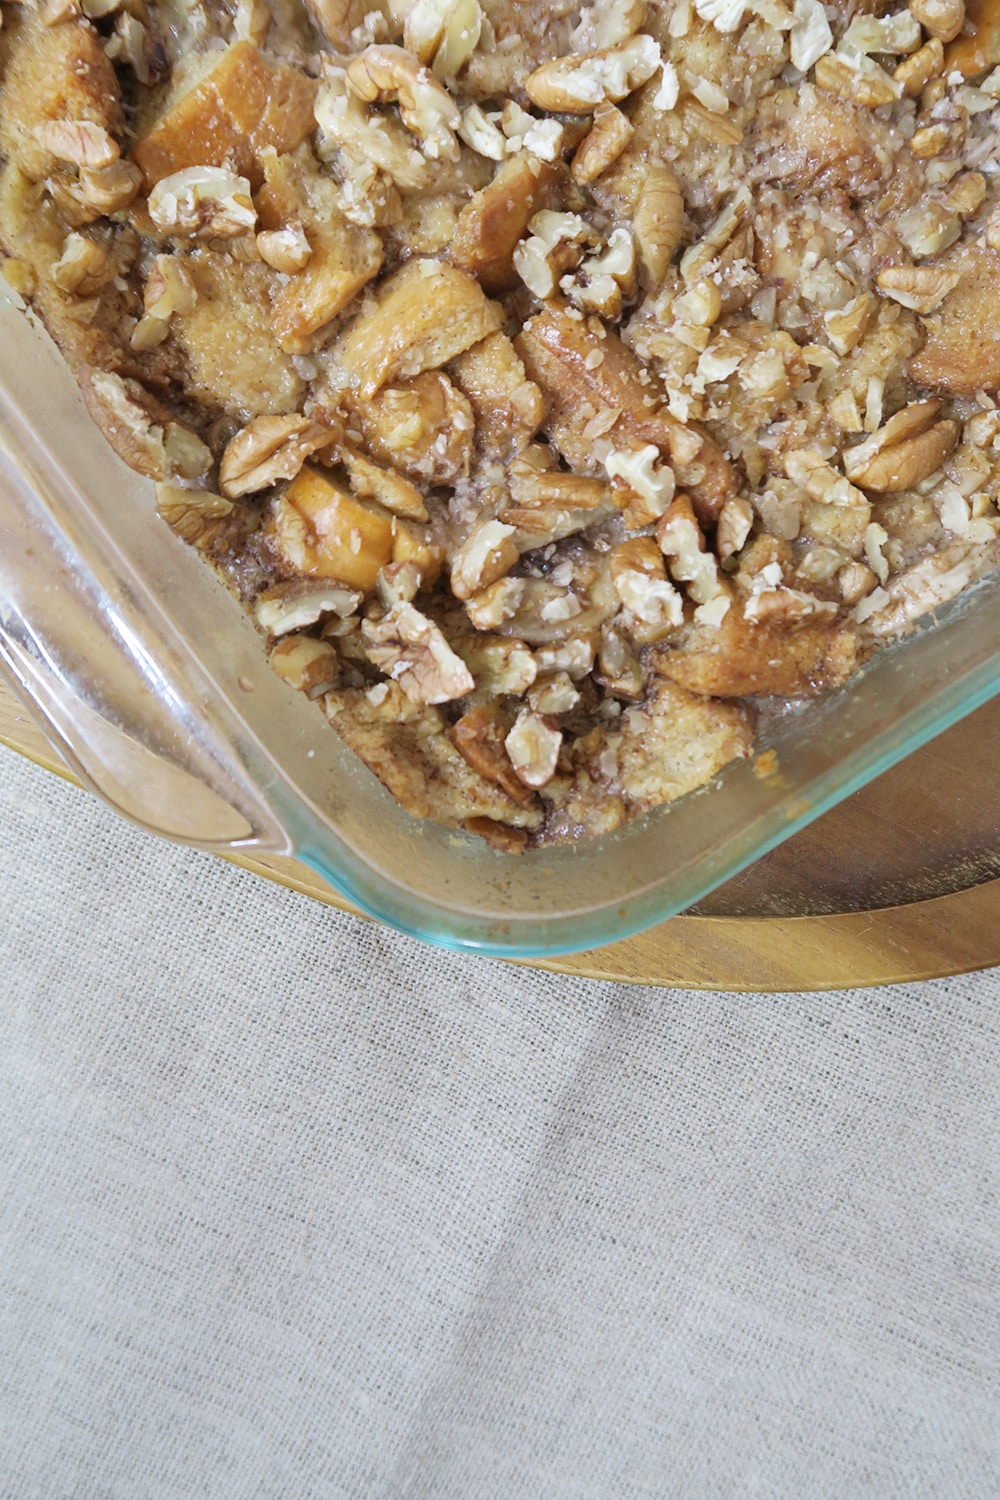 This banana french toast bread pudding recipe is a sweet combo of two delicious dishes. Great for breakfast or a side, it's a dish you won't want to miss!